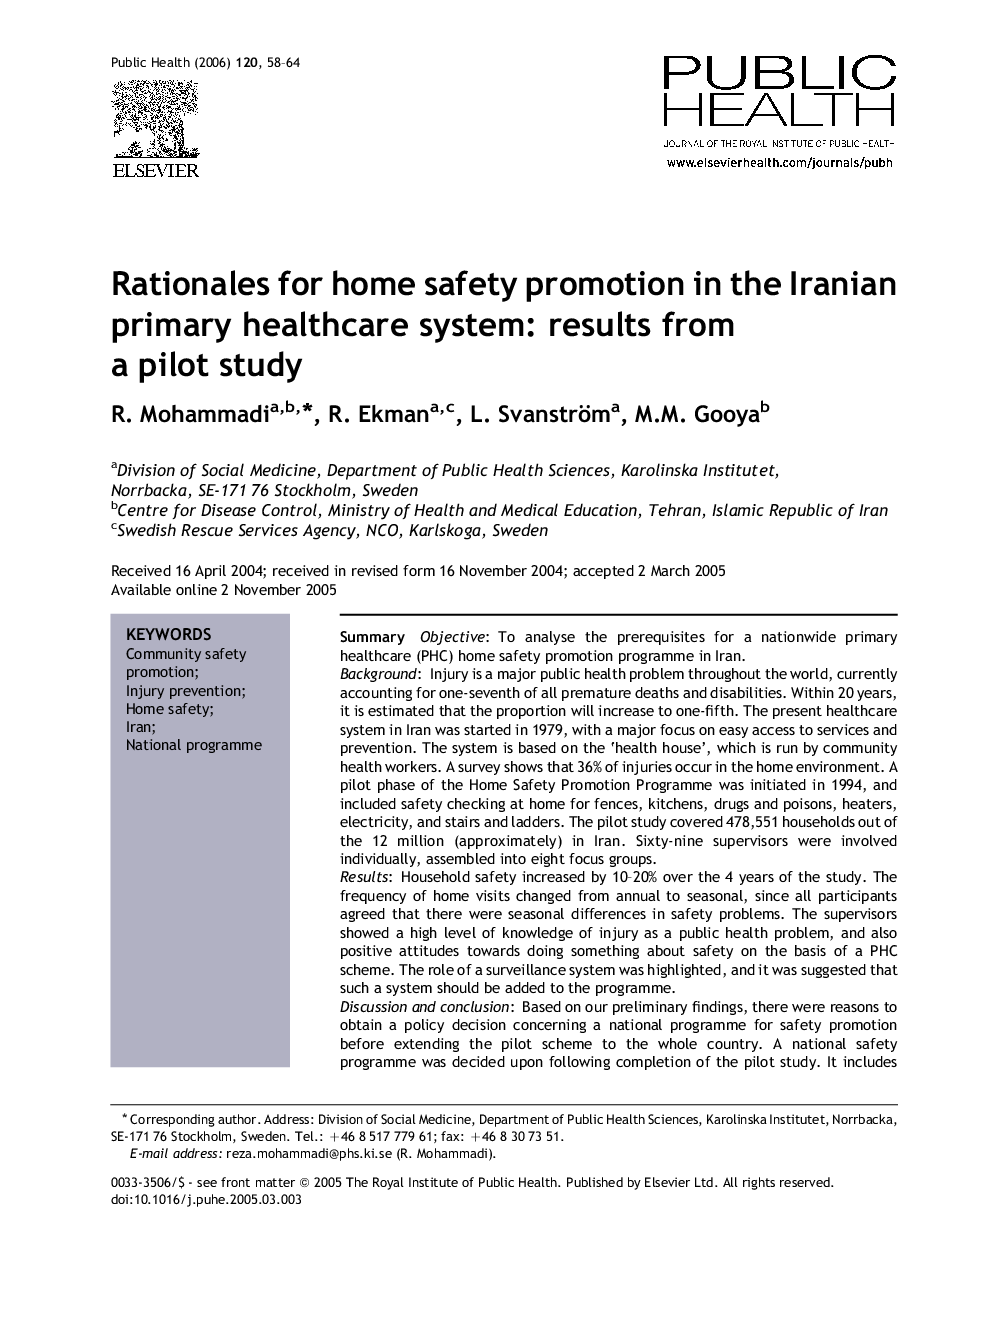 Rationales for home safety promotion in the Iranian primary healthcare system: results from a pilot study